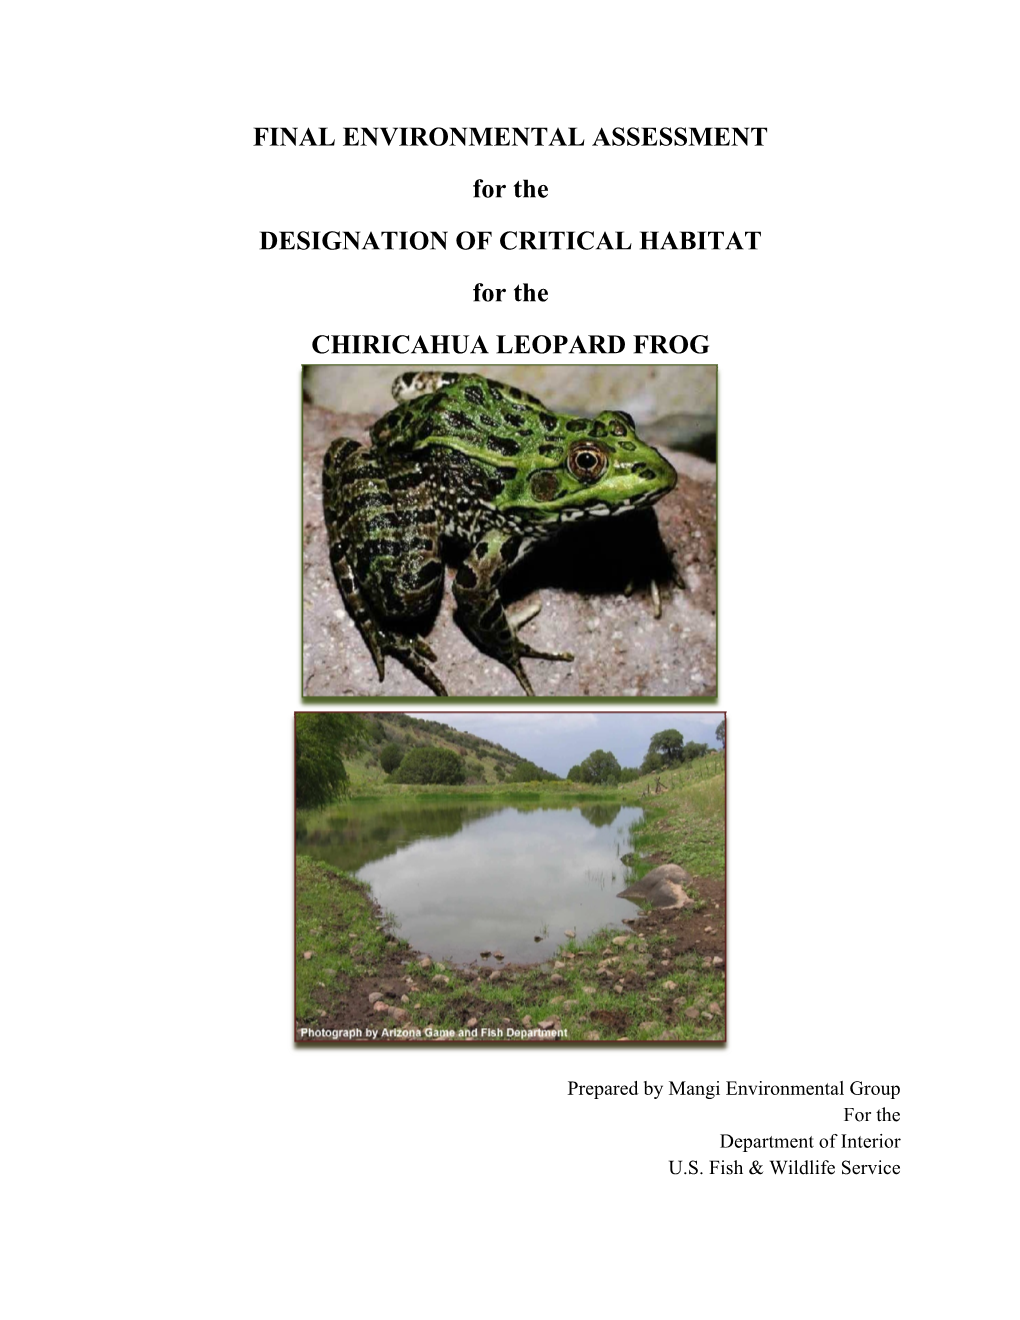 FINAL ENVIRONMENTAL ASSESSMENT for the DESIGNATION of CRITICAL HABITAT for the CHIRICAHUA LEOPARD FROG